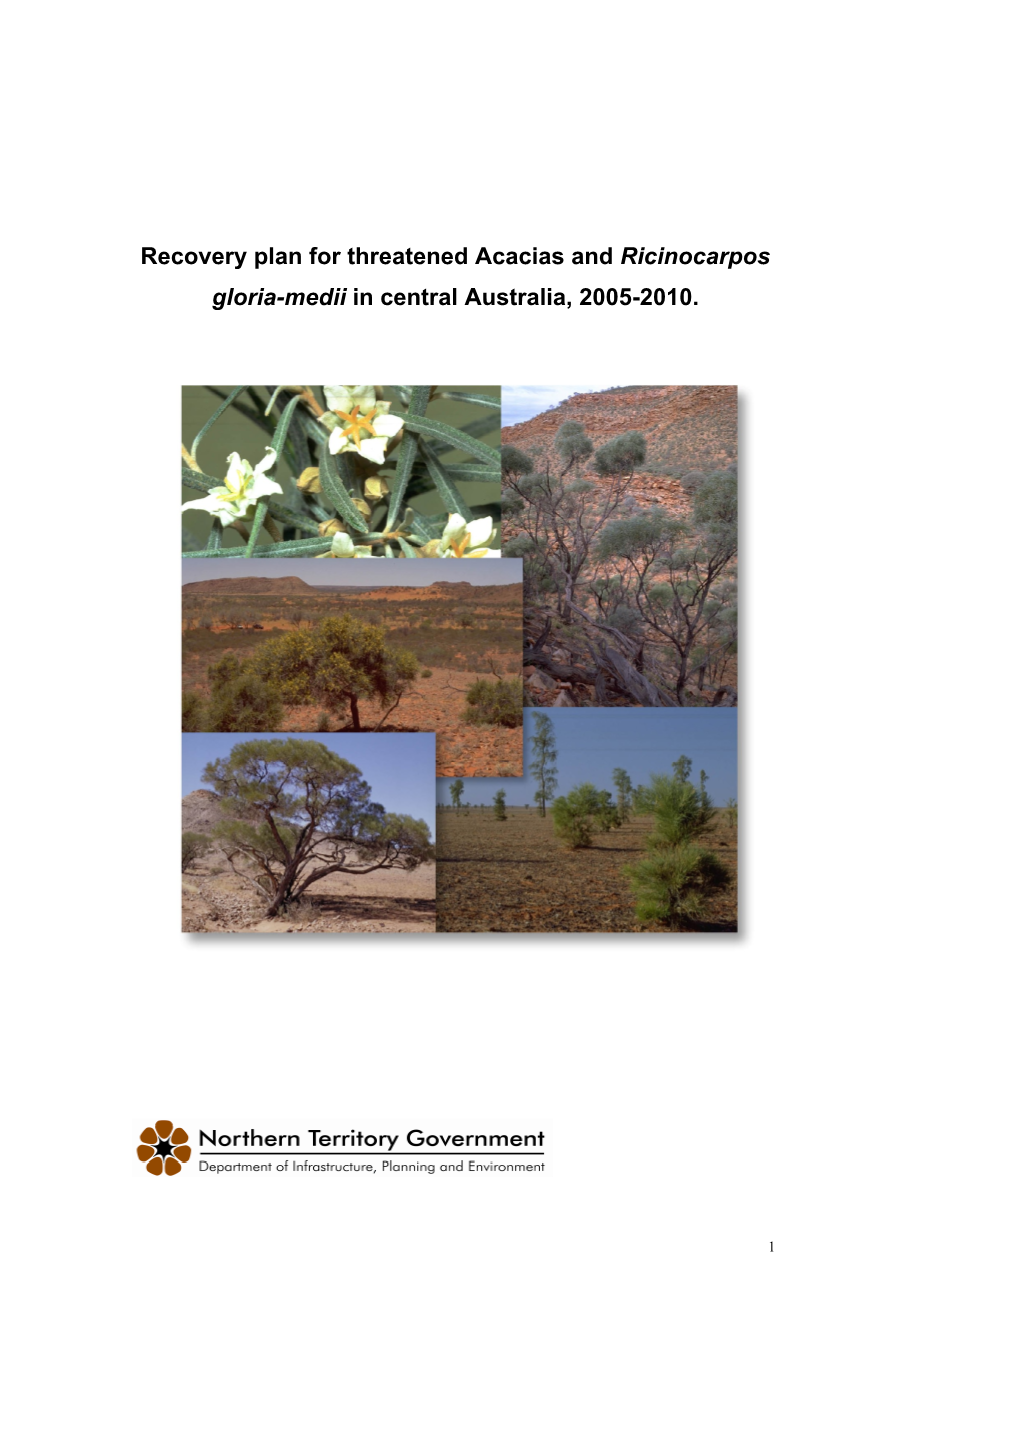 Recovery Plan for Threatened Acacias and Ricinocarpos Gloria-Medii in Central Australia, 2005-2010